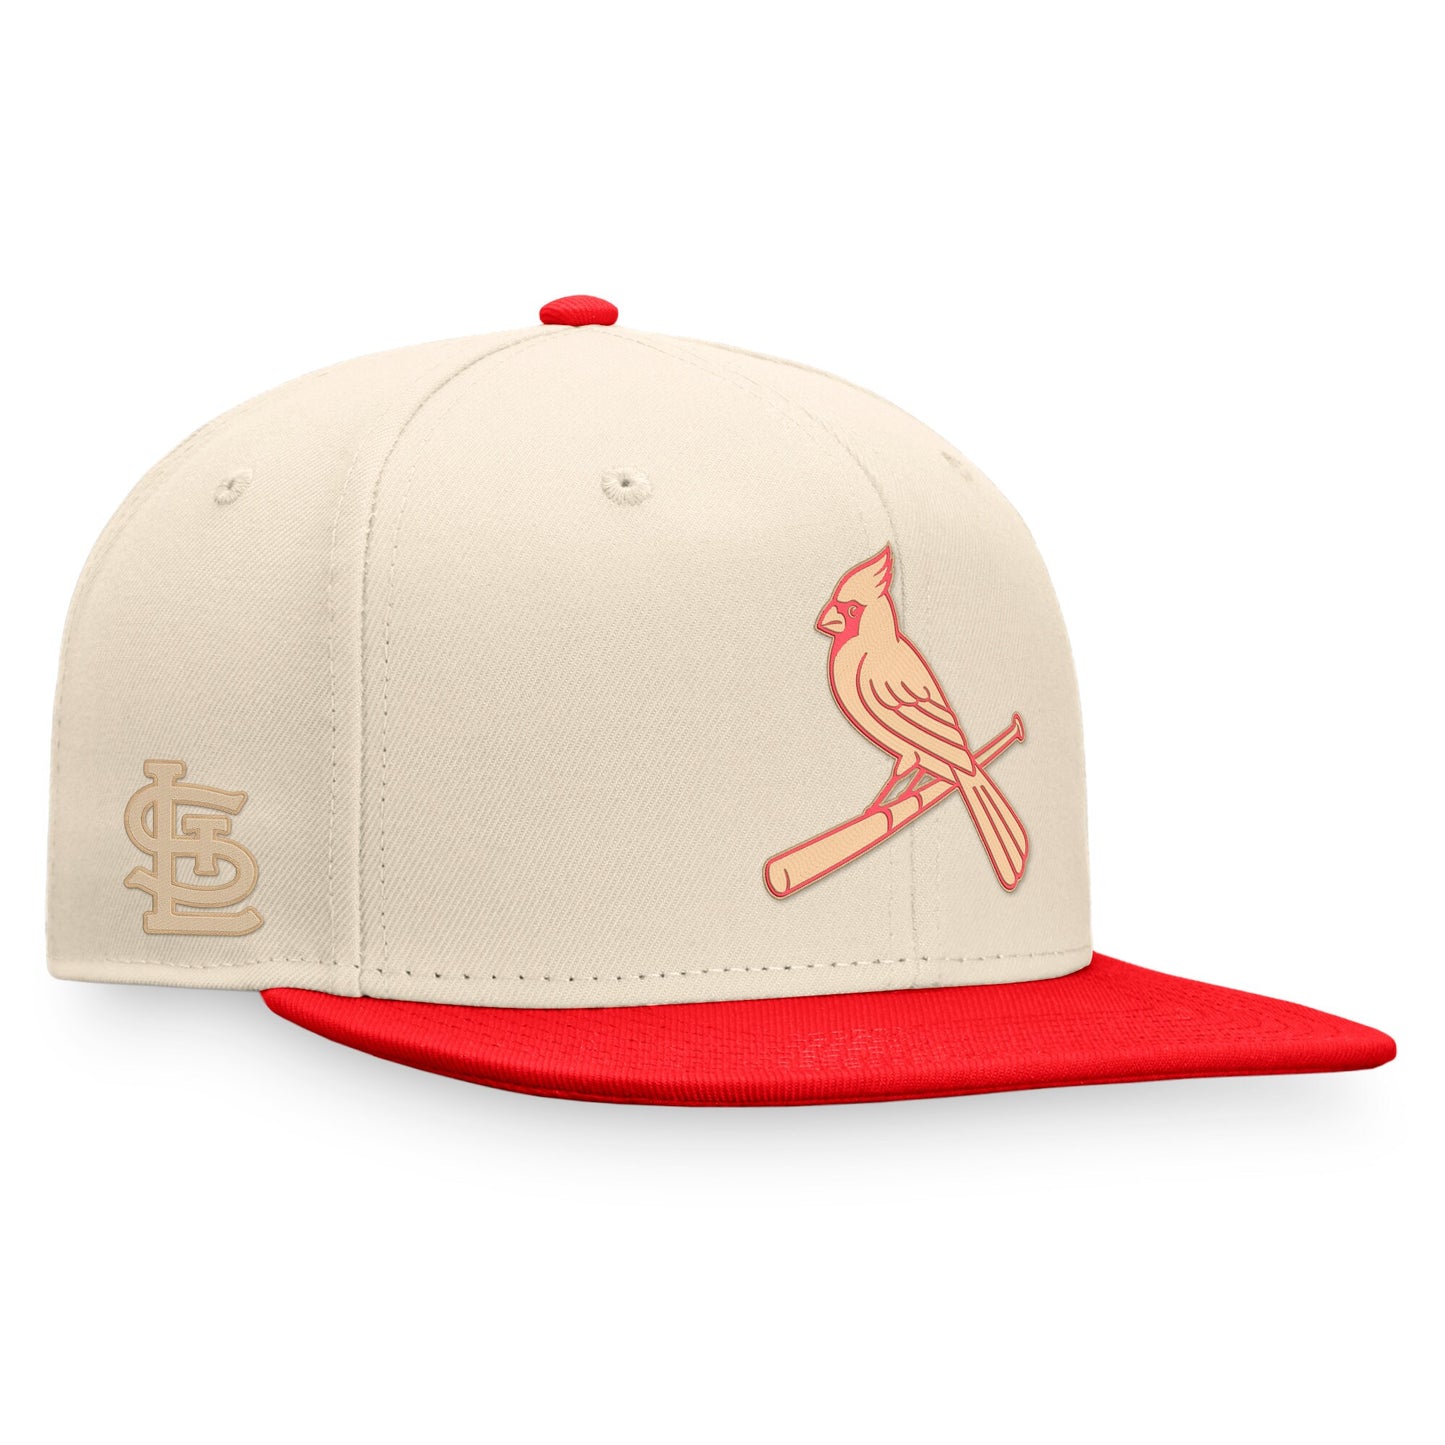 St. Louis Cardinals Fanatics Branded Fitted Hat - Natural/Red